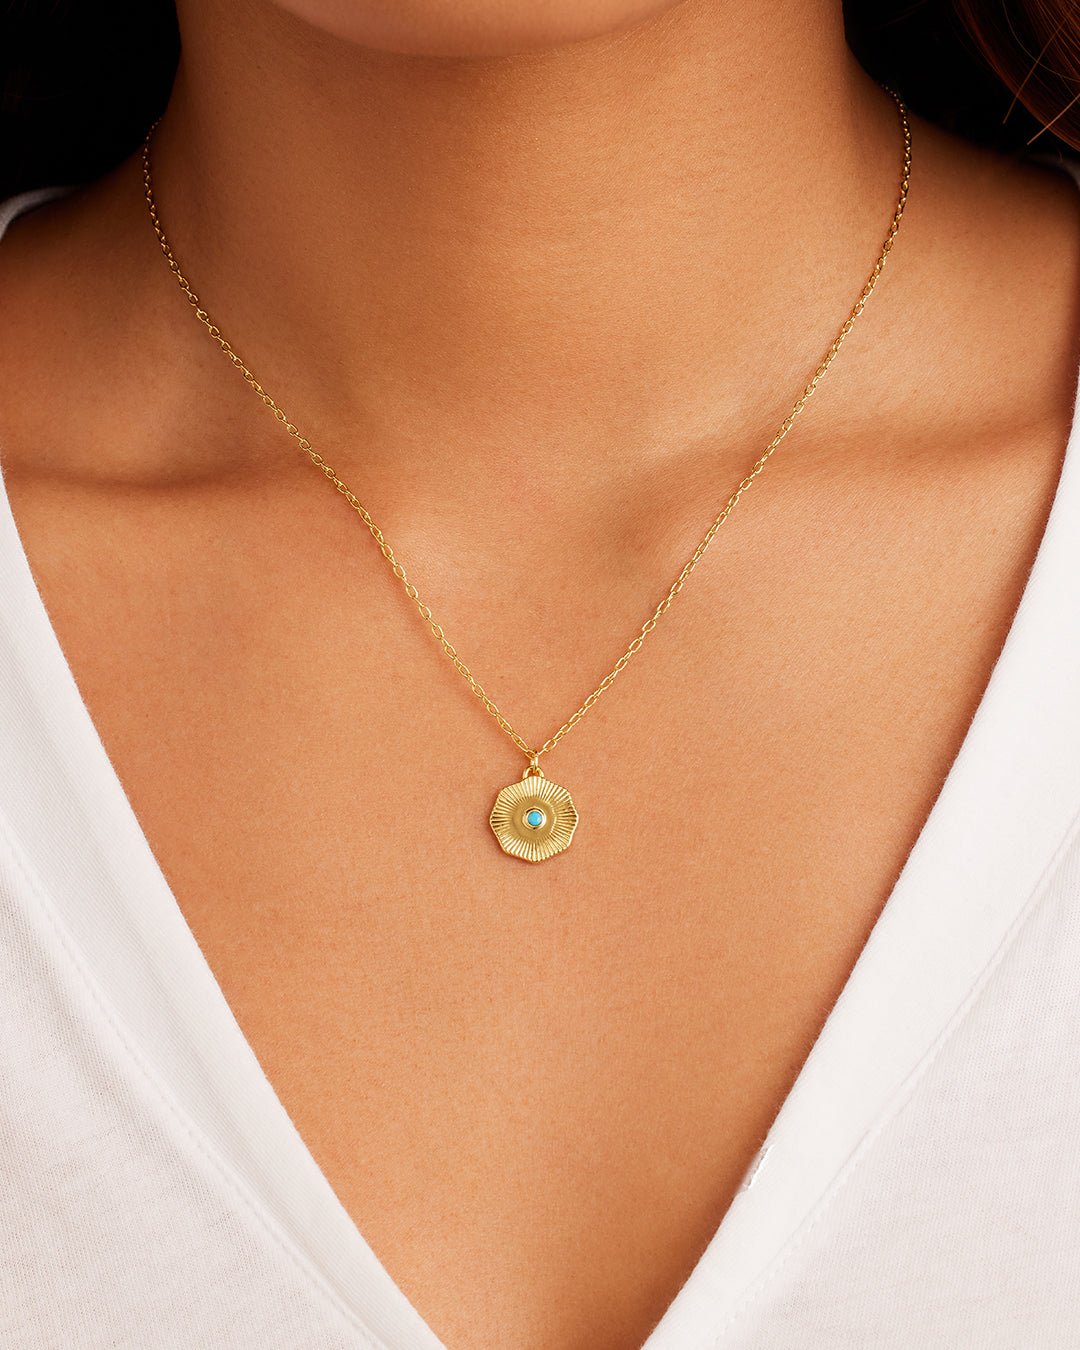 Birthstone Coin Necklace || option::Gold Plated, Turquoise - December